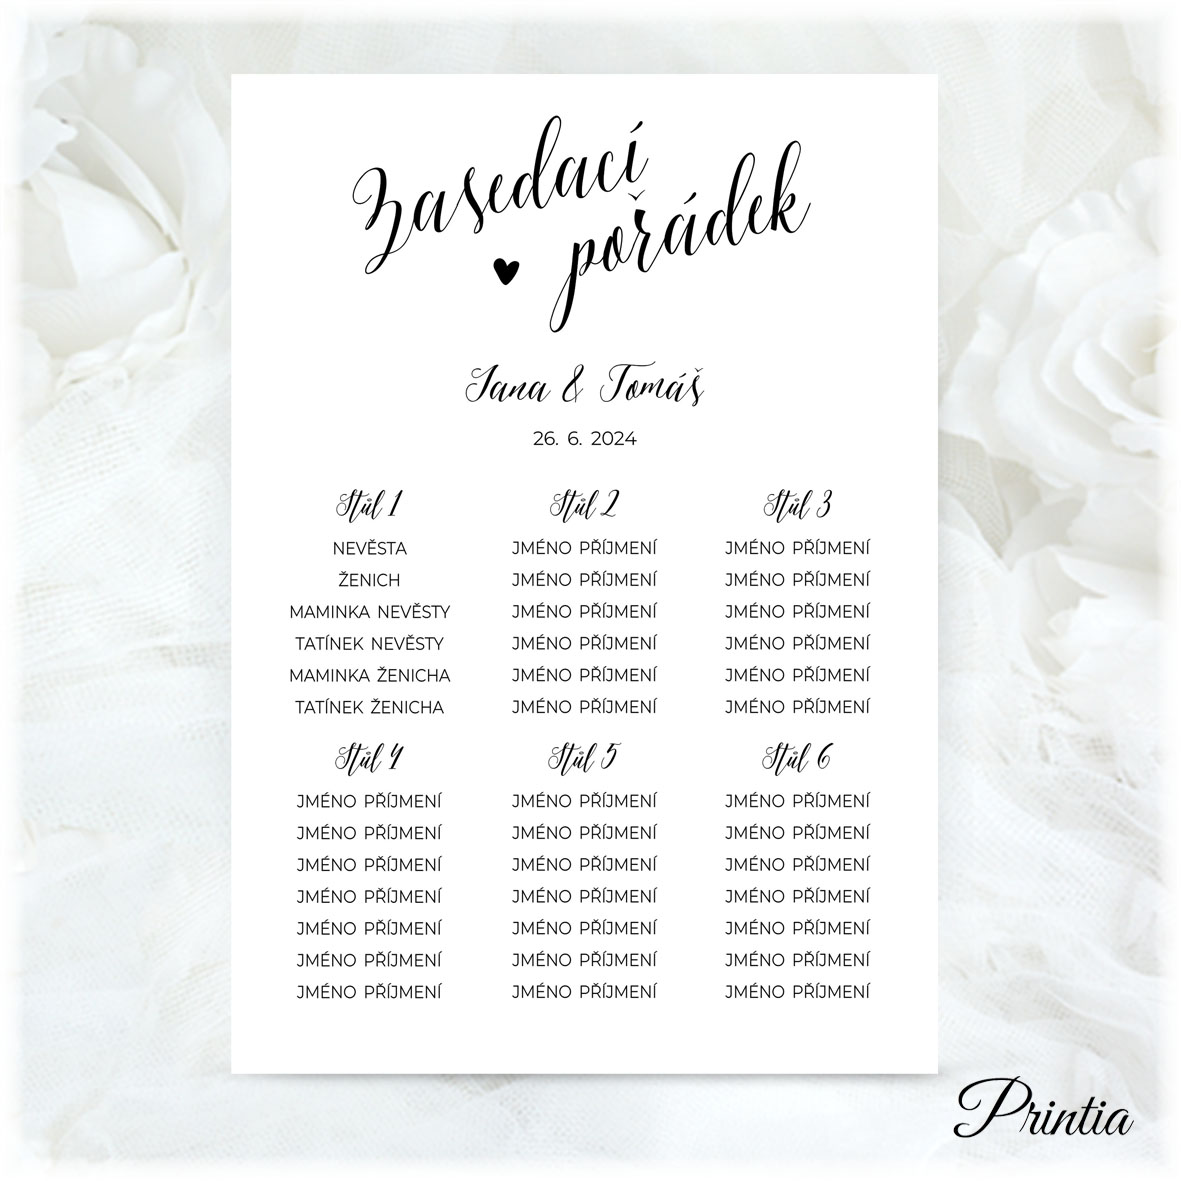 Wedding seating plan with a heart